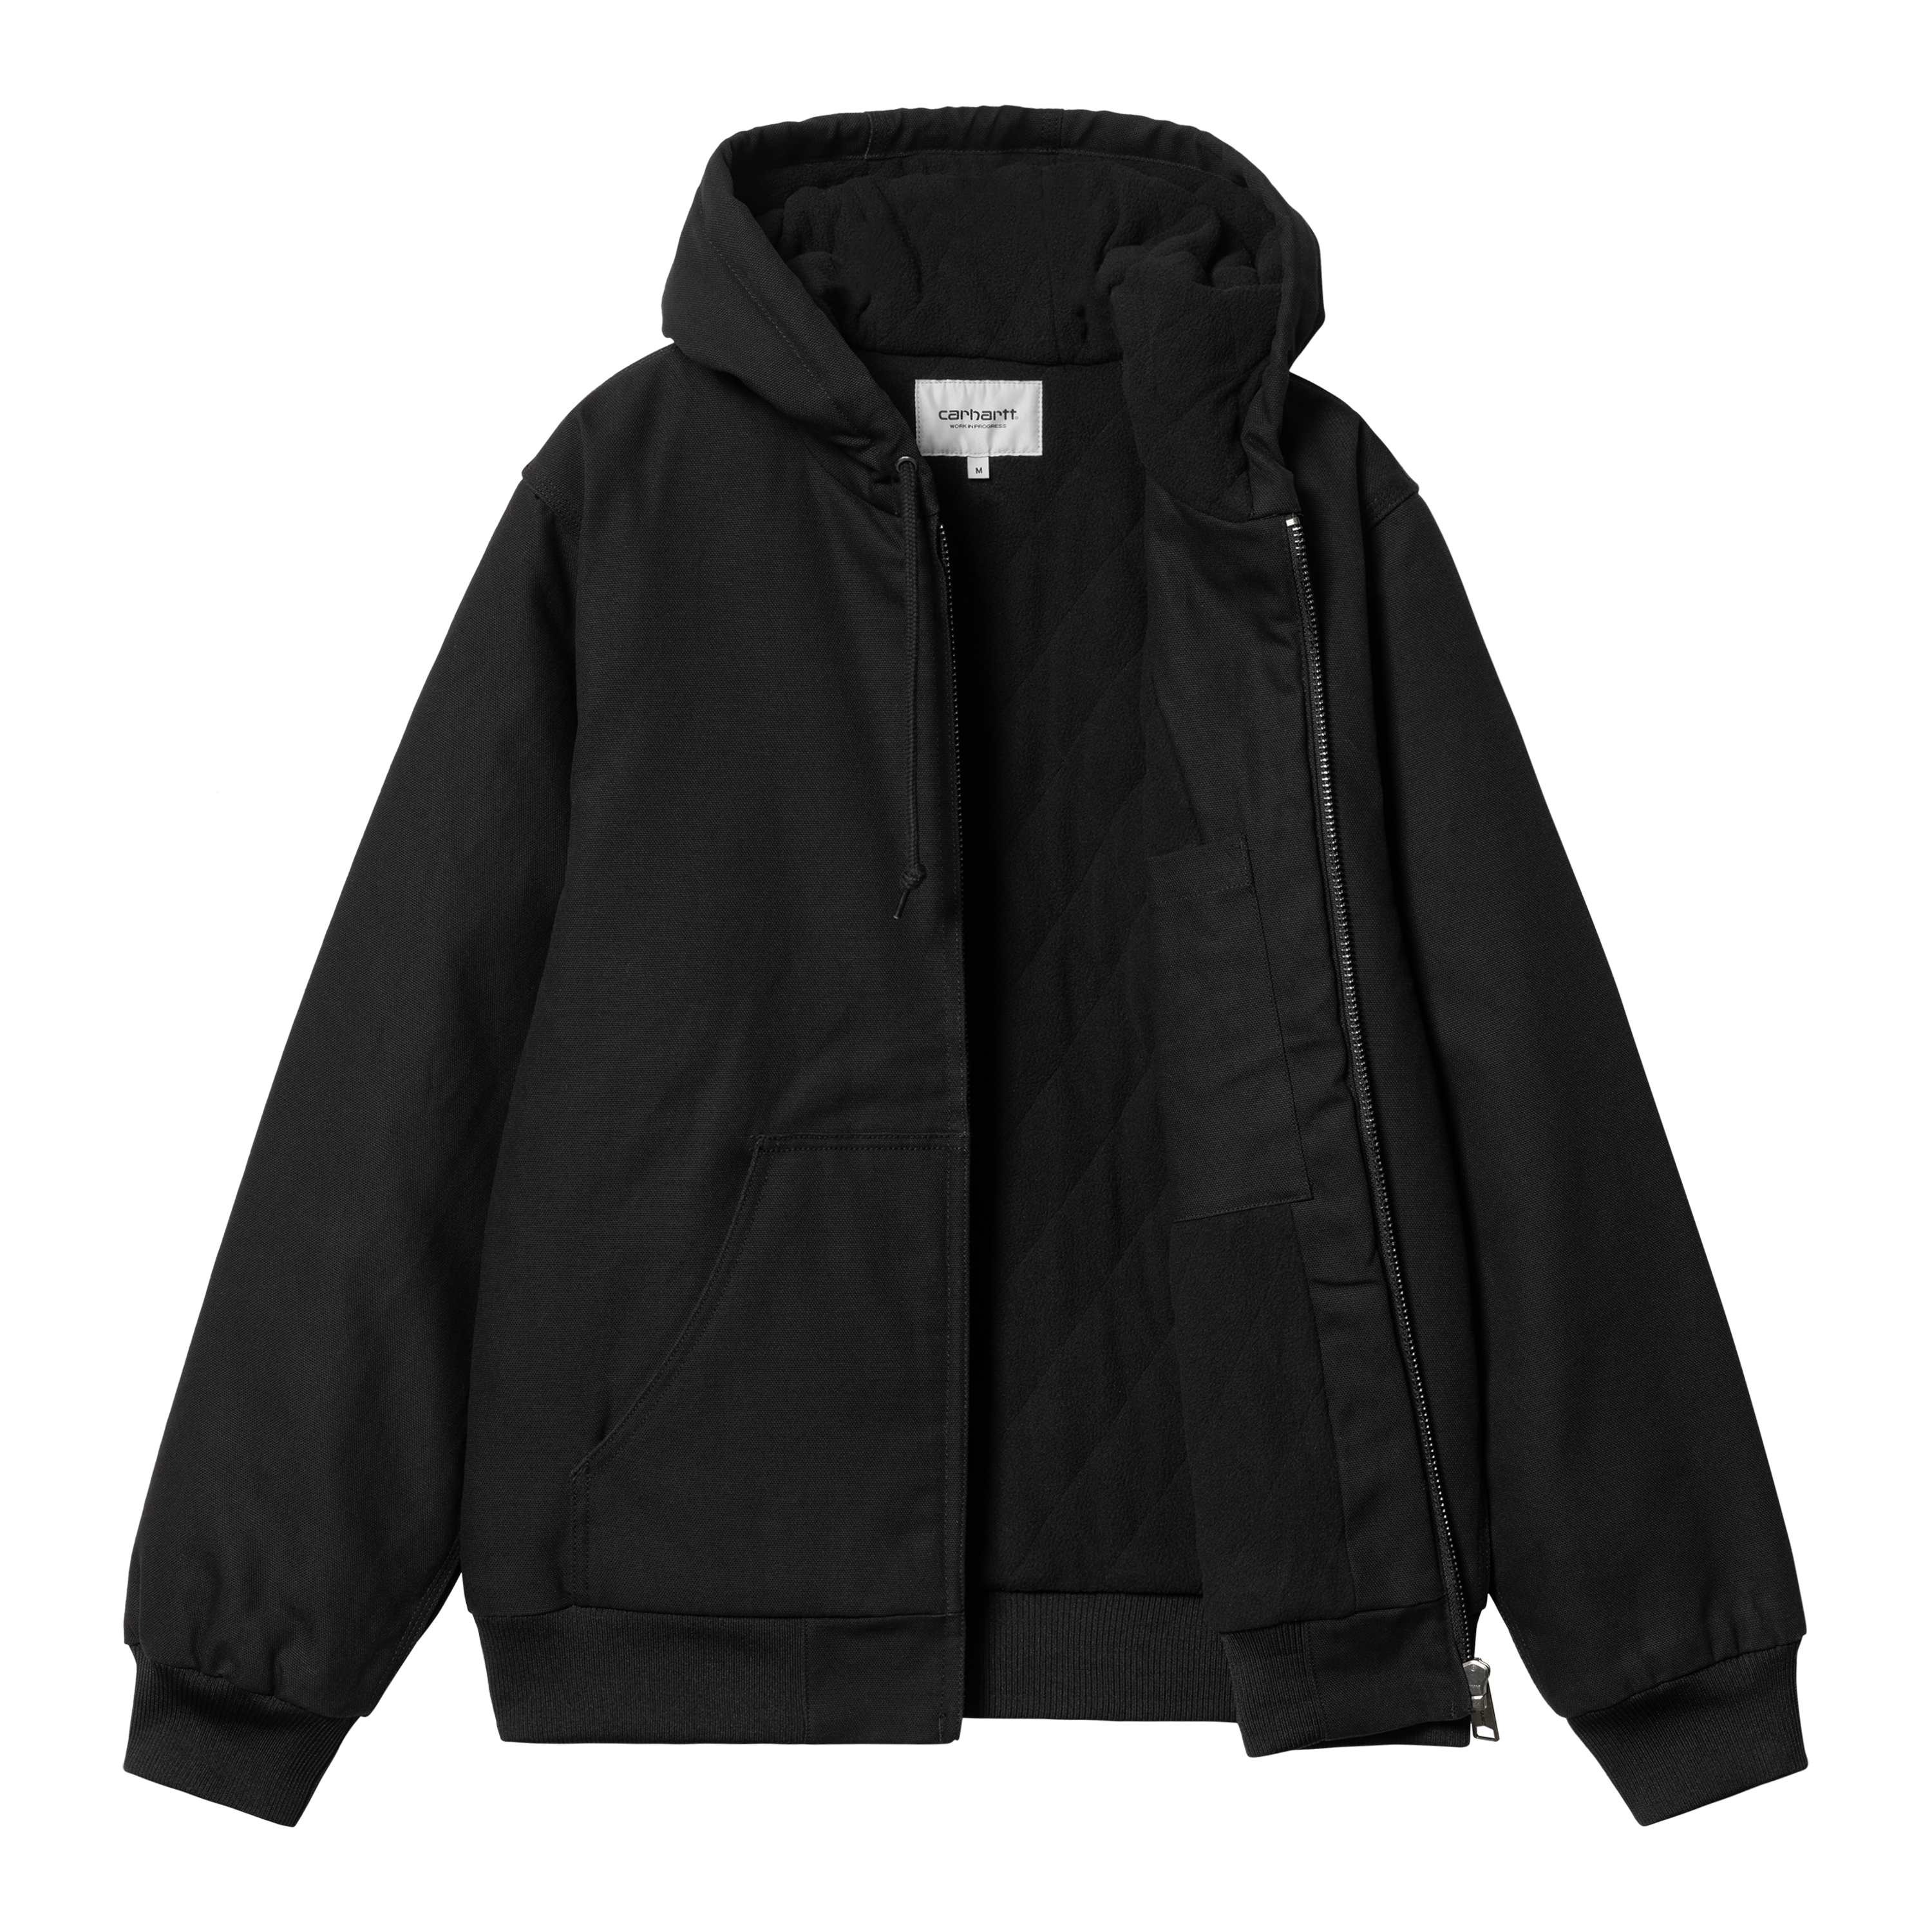 Carhartt WIP Active Cold Jacket (Olive) I032828.63.XX - Allike Store